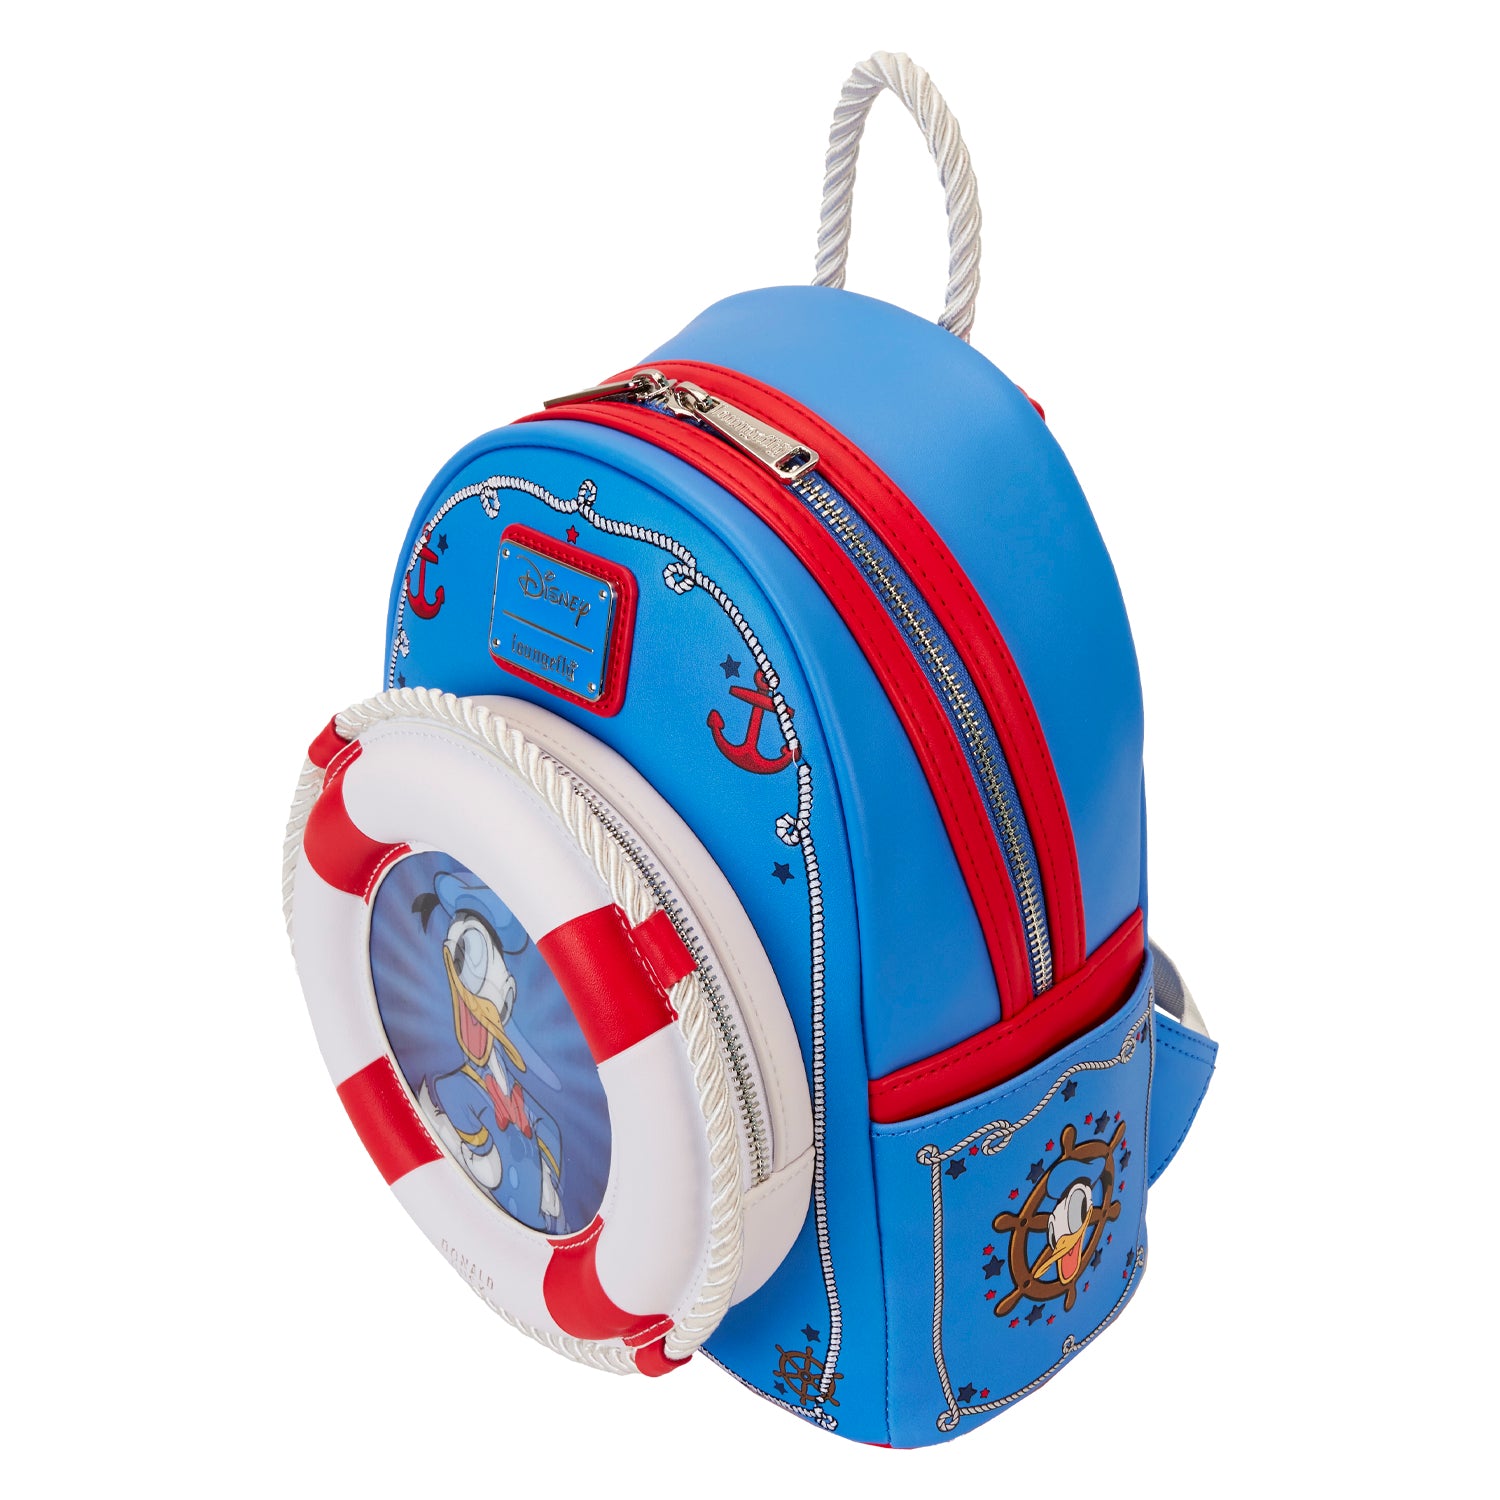 Loungefly Disney Donald Duck 90th Anniversary Mini Backpack